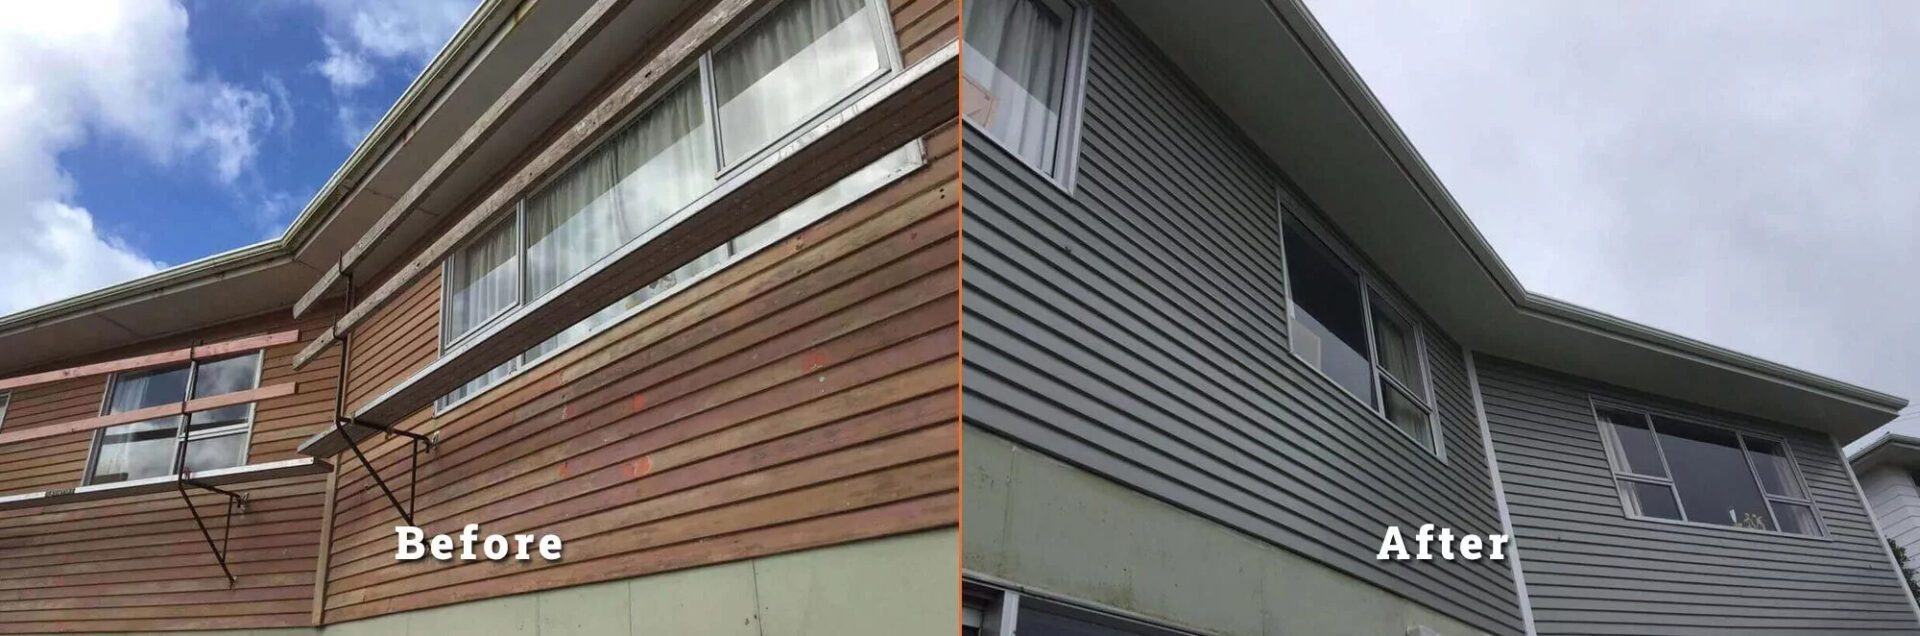 House Painters in Lower Hutt before and after gallery